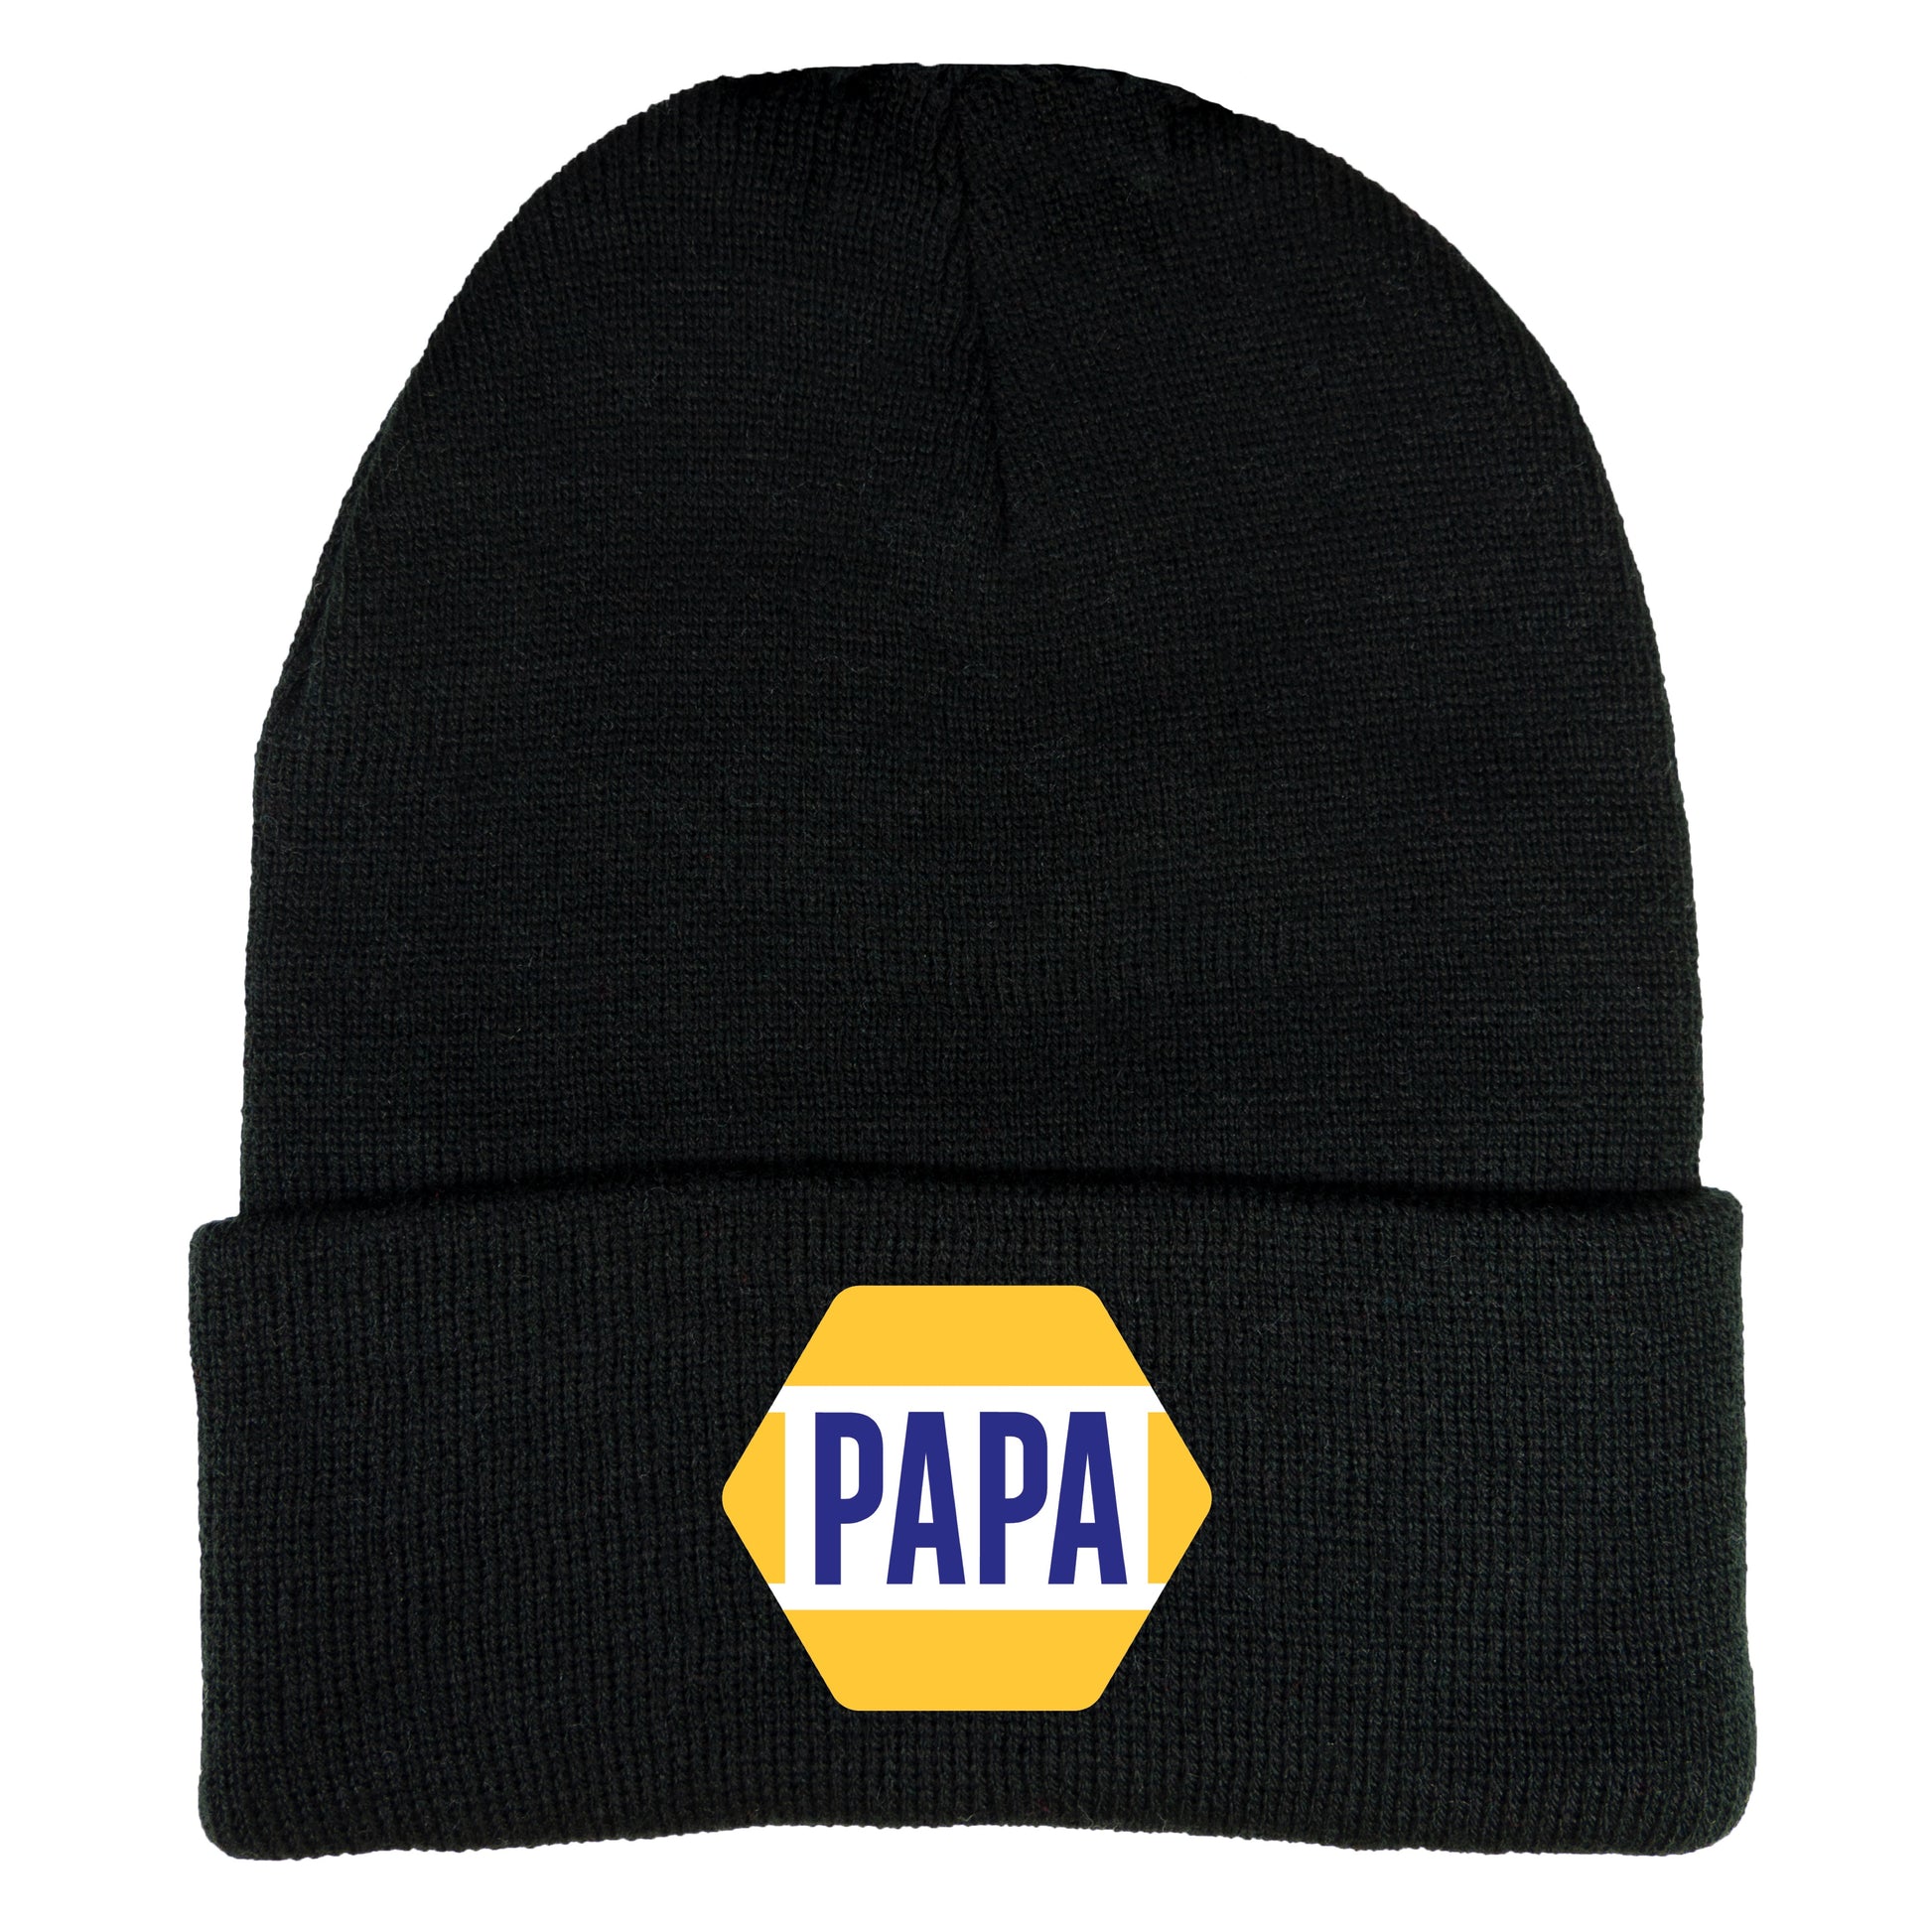 PAPA Know How 3D 12 in Knit Beanie- Black - Ten Gallon Hat Co.